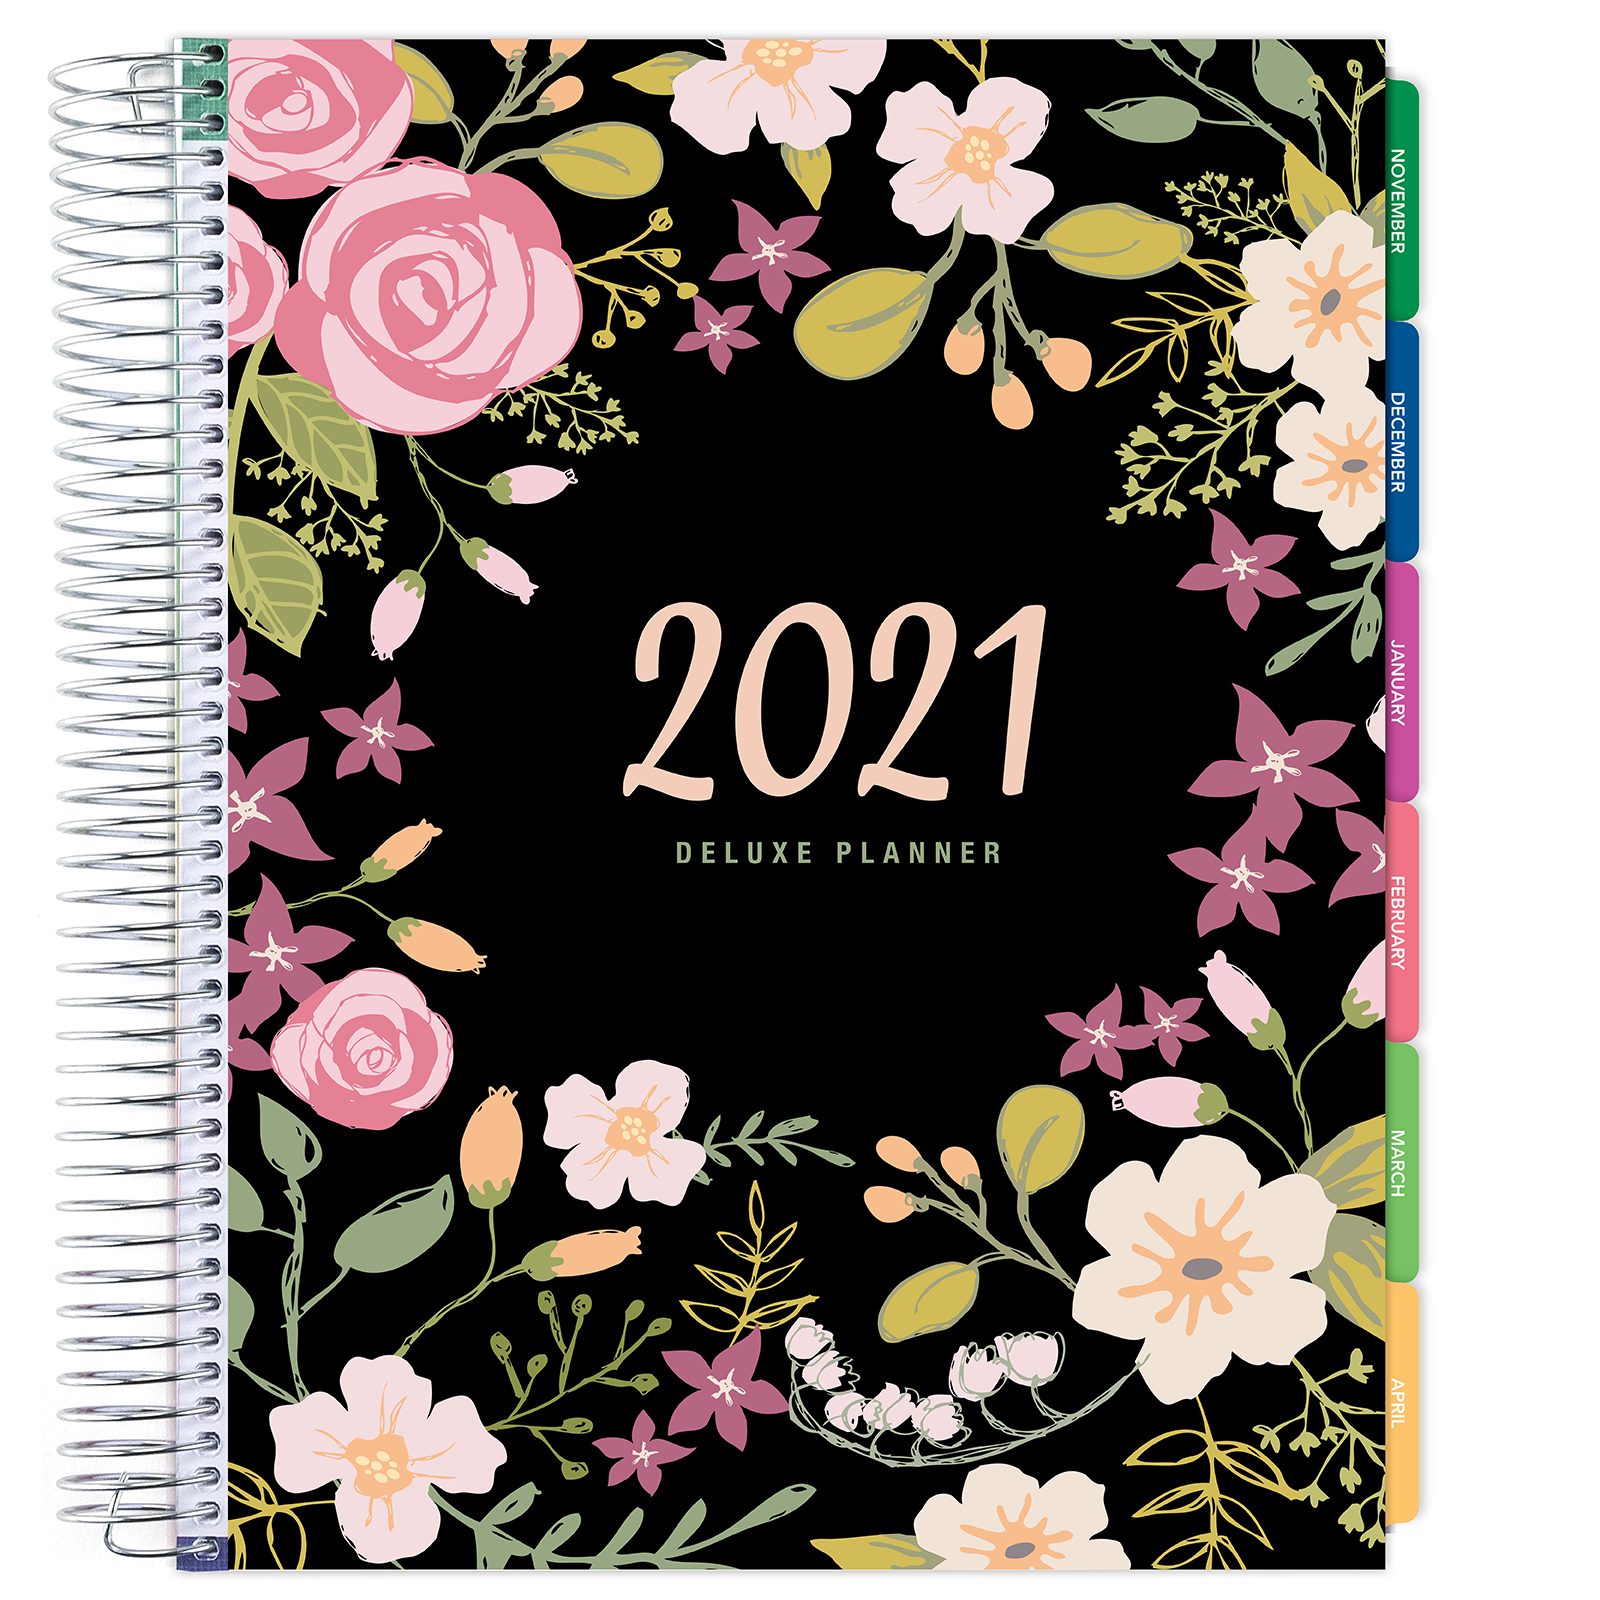 Details about   DELUXE Planner Daily Weekly Monthly Planner Yearly Agenda Nov 2020 - Dec 2021 